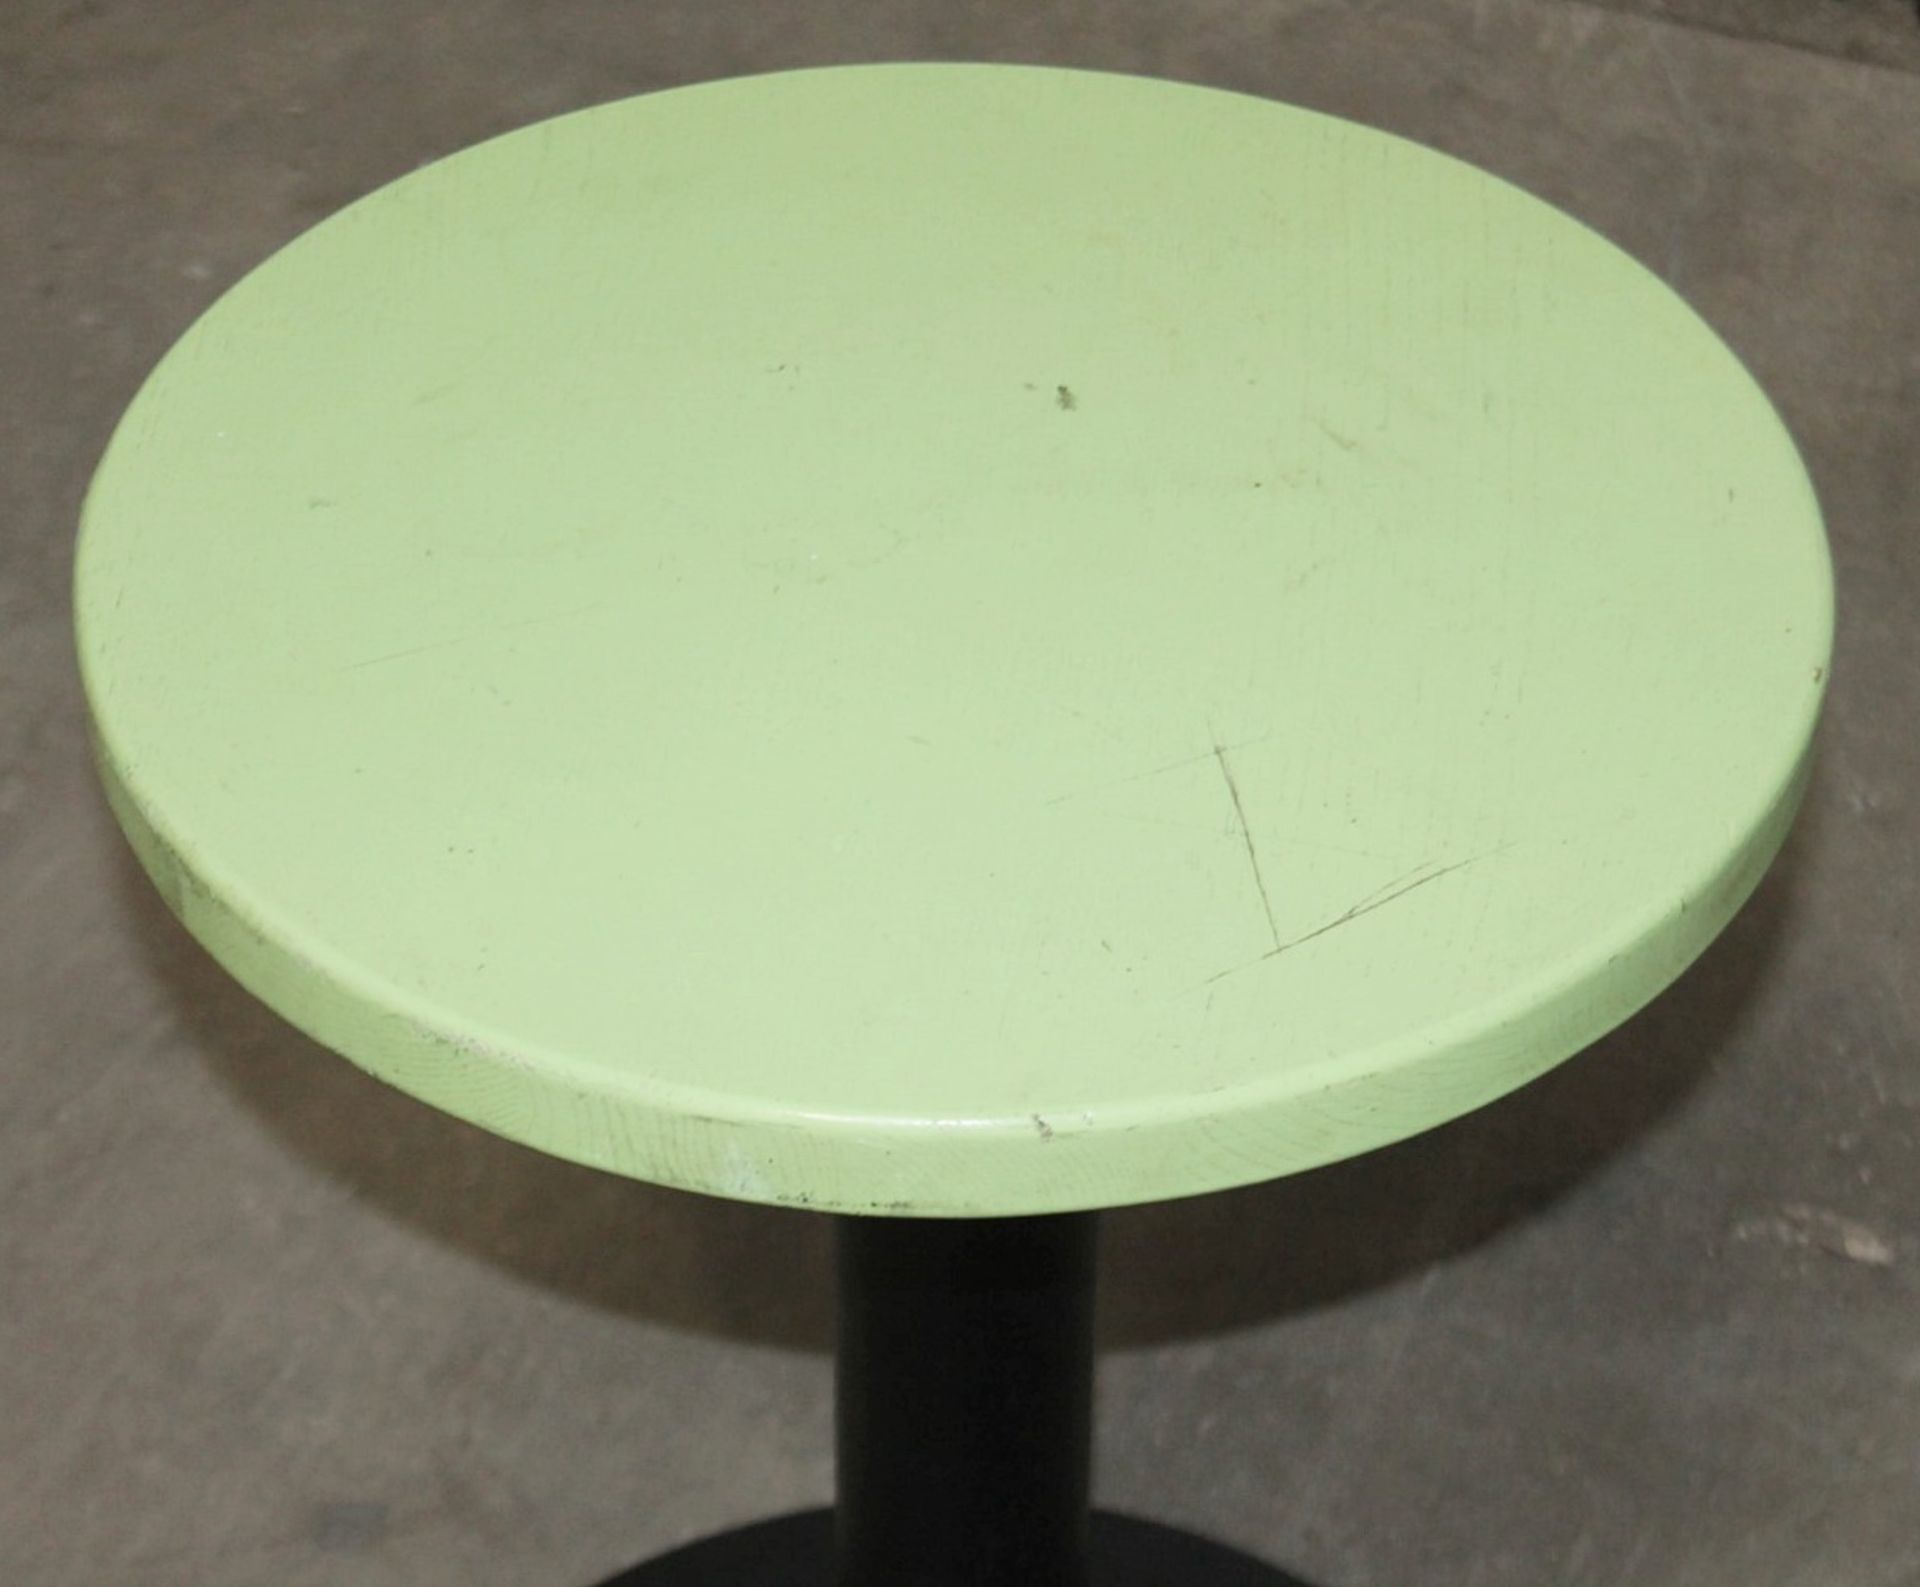 1 x Rustic Low Profile Bespoke Bar Table With A Lime Green Paineted Top - Dimensions: H61 x - Image 3 of 4